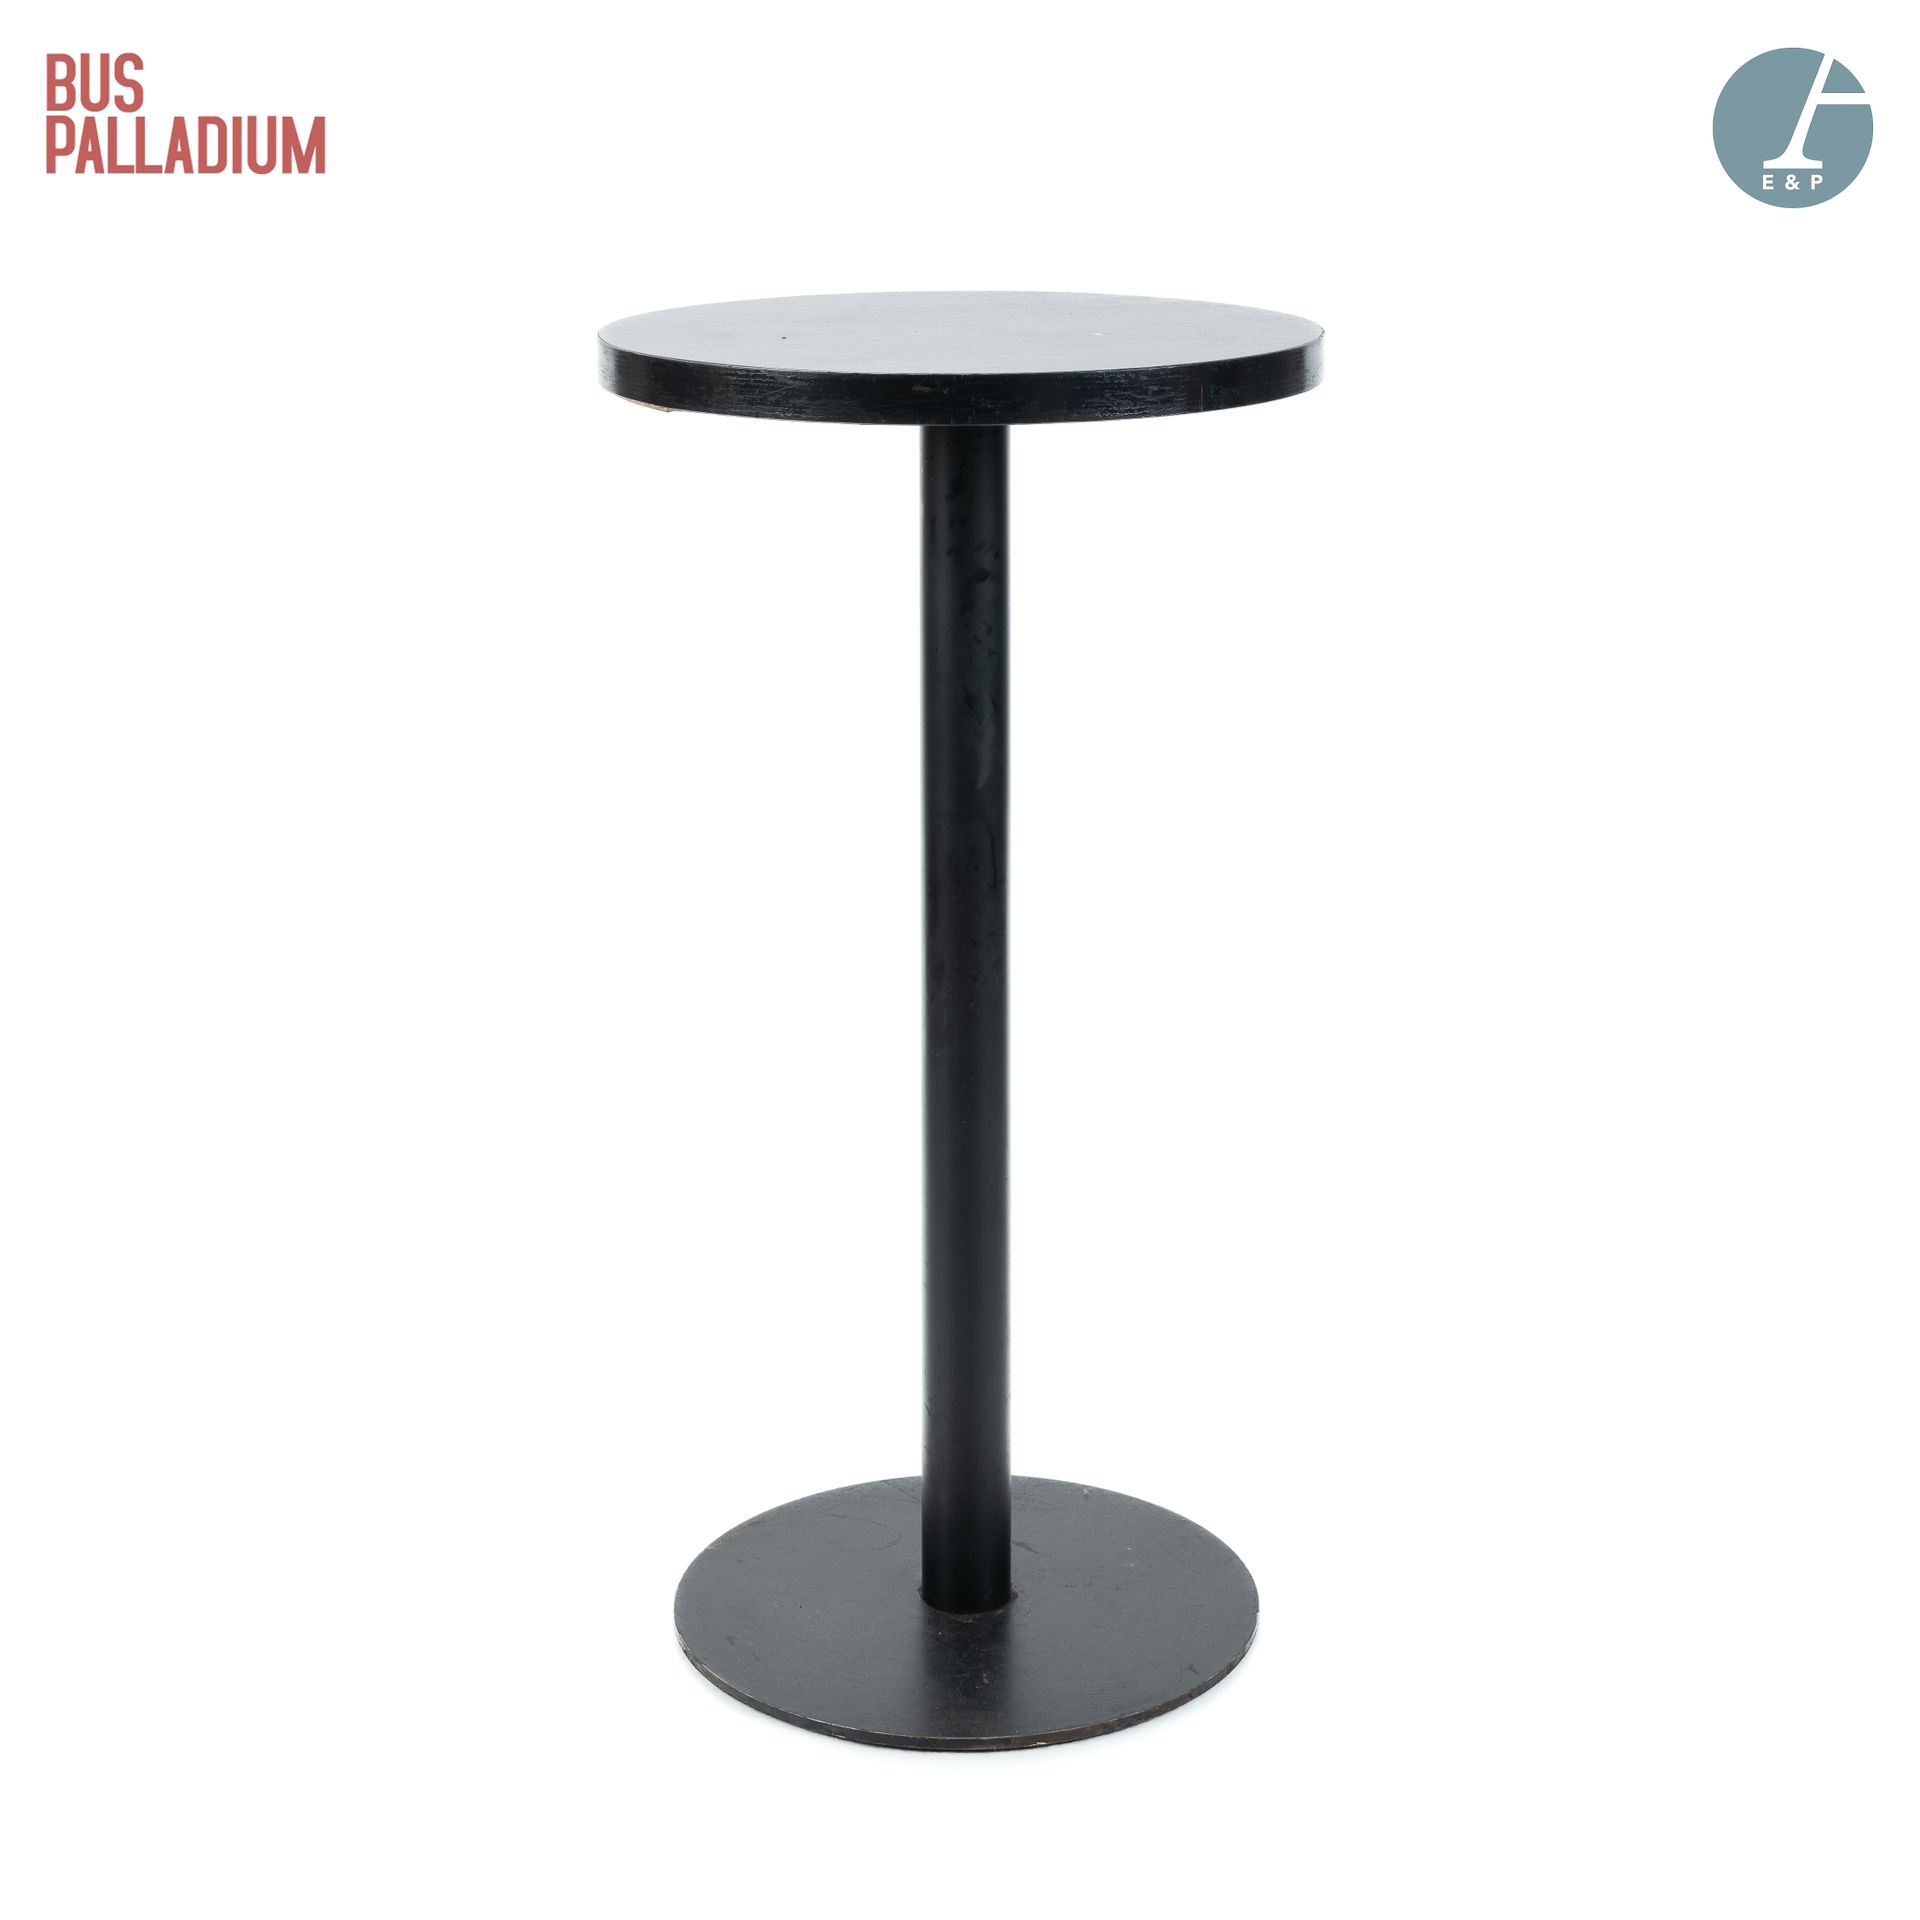 Null From the Bus Palladium concert hall



Dining table, the circular top in bl&hellip;